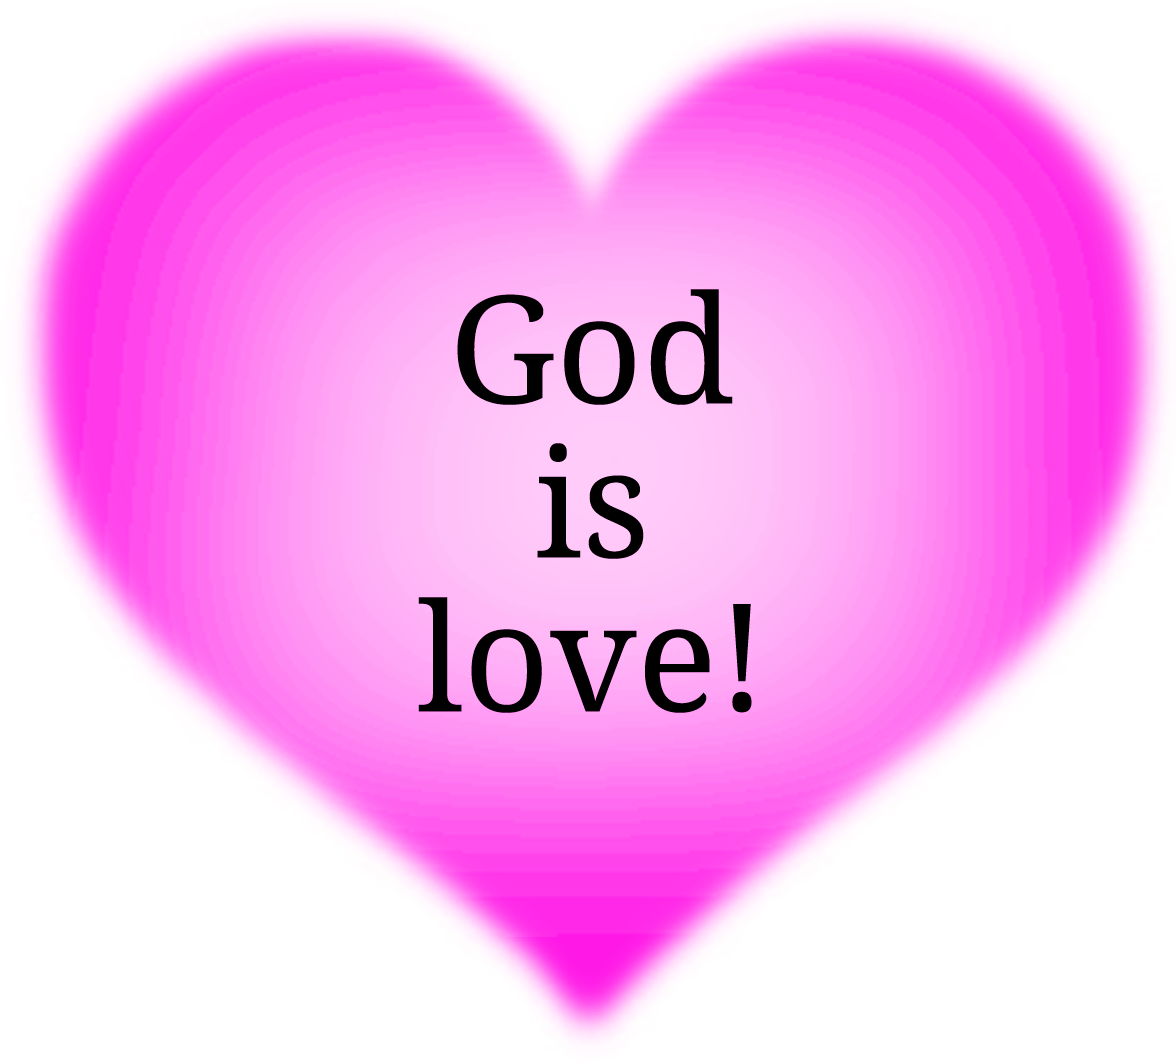 Glowing transparent pink-purple heart that says 'God is love!'